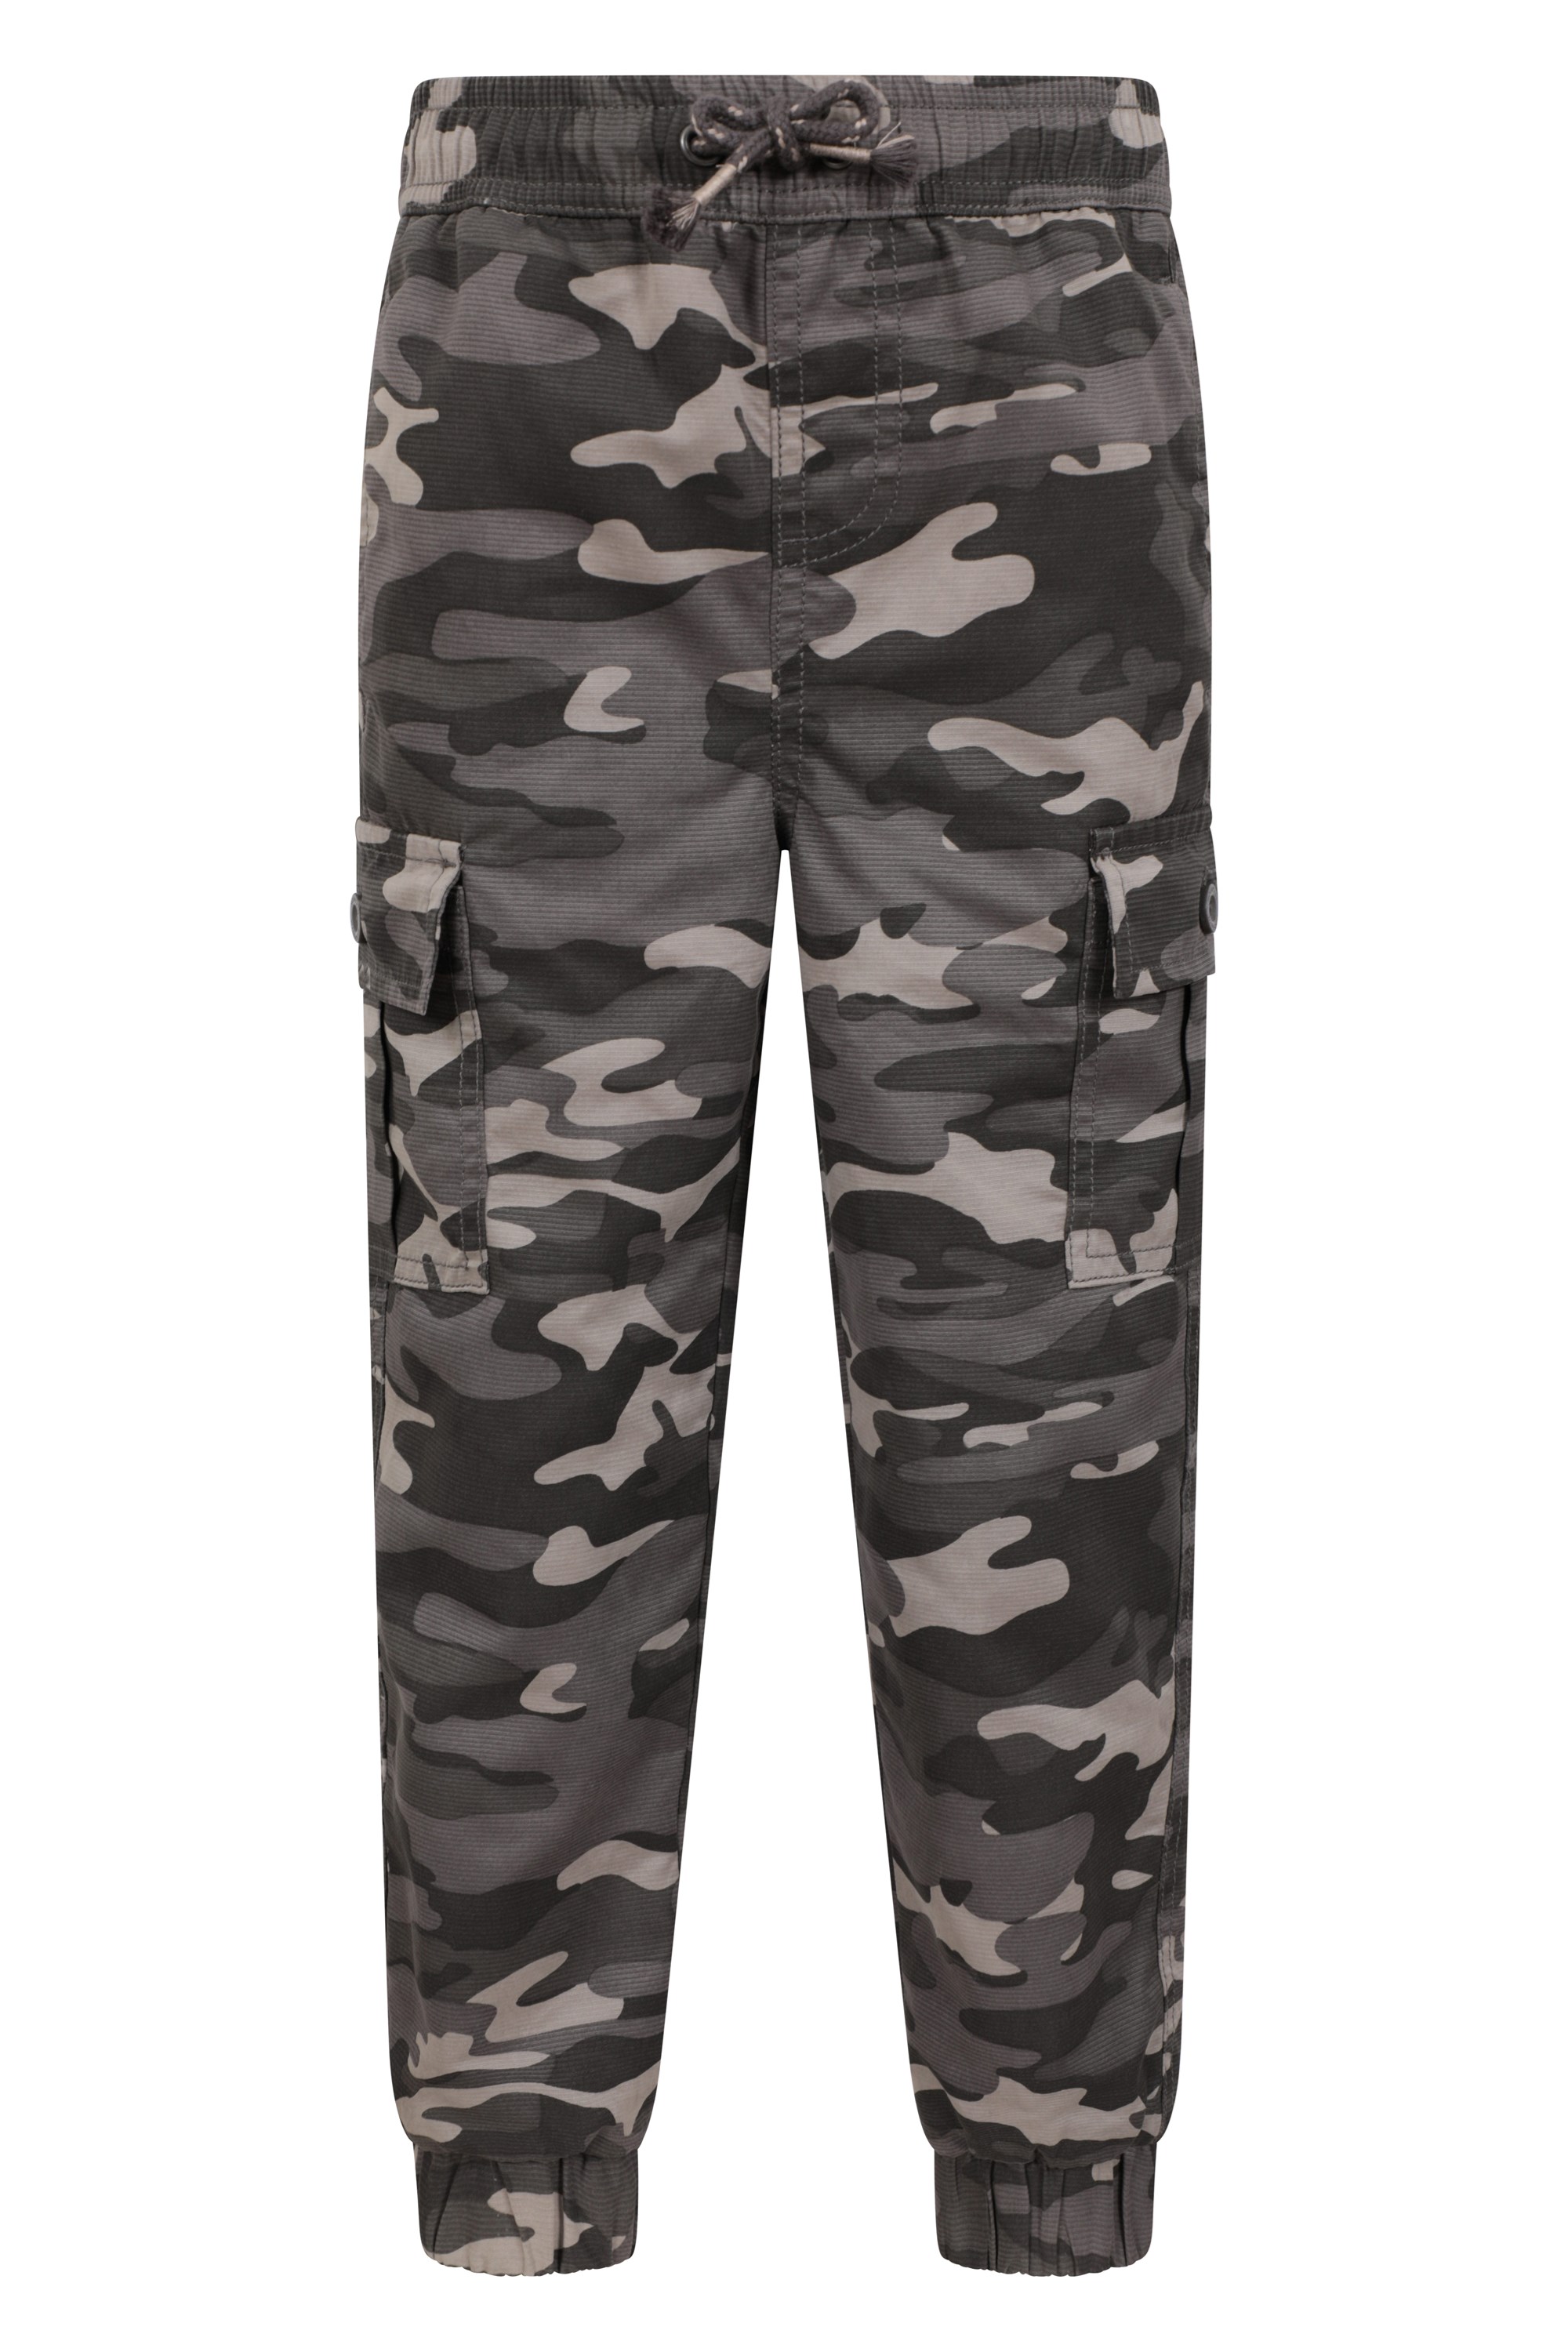 Camo Kids Stain Resistant Cargo Trousers - Black